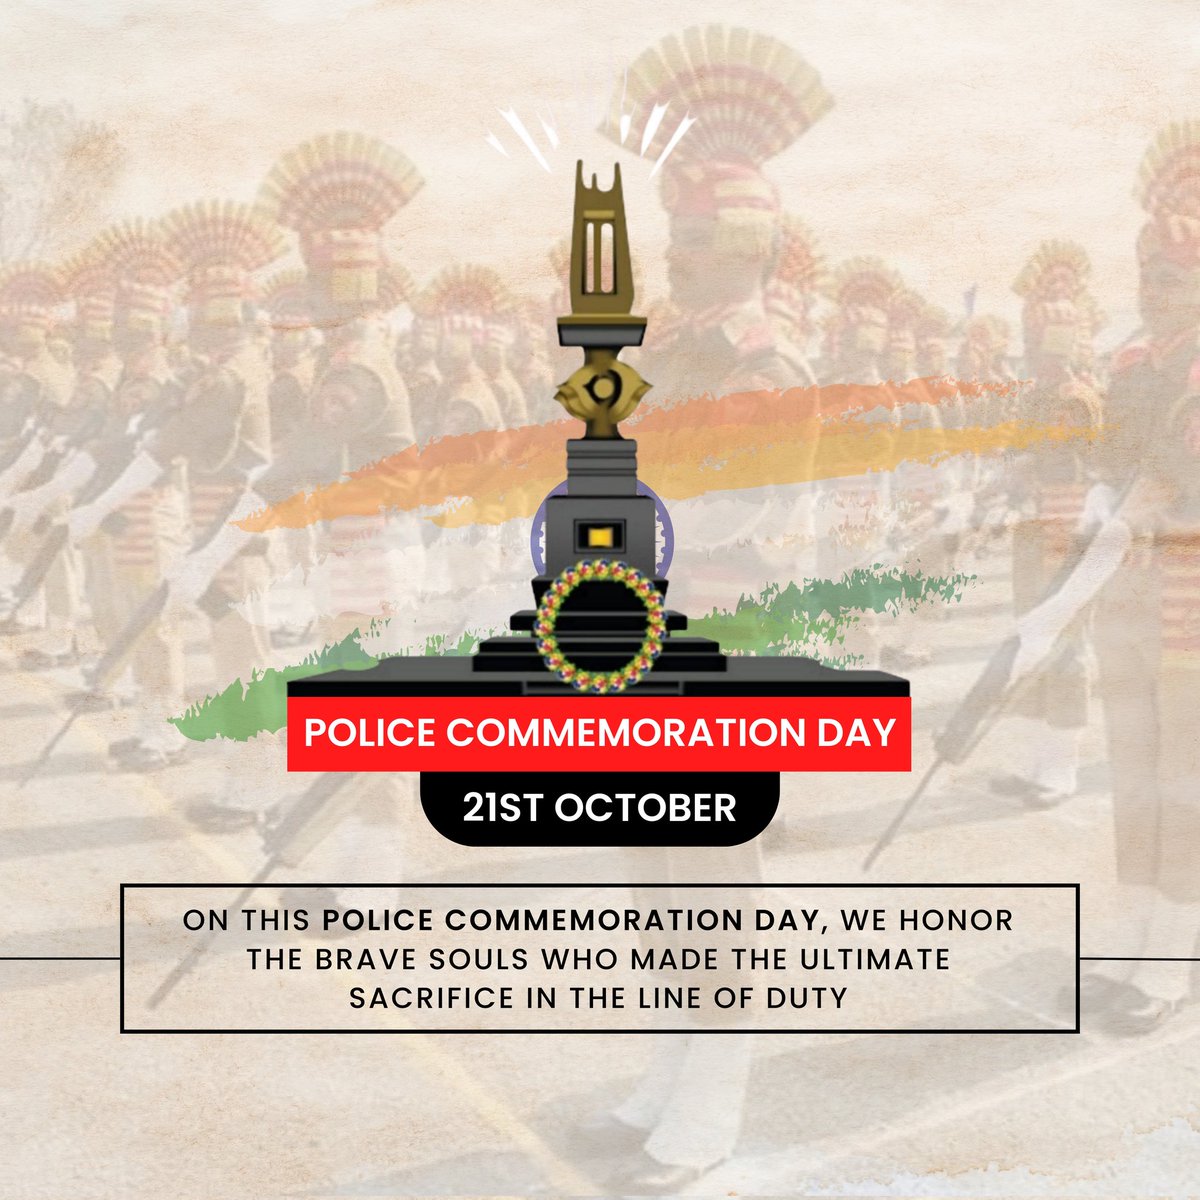 As we observe the #PoliceCommemorationDay , we pay tribute to the courageous Martyrs who made the ultimate sacrifice in the line of duty. We extend our support to the families of these bravehearts, let us recommit ourselves to serving our beloved motherland. 🇮🇳
#PoliceMartyrsDay